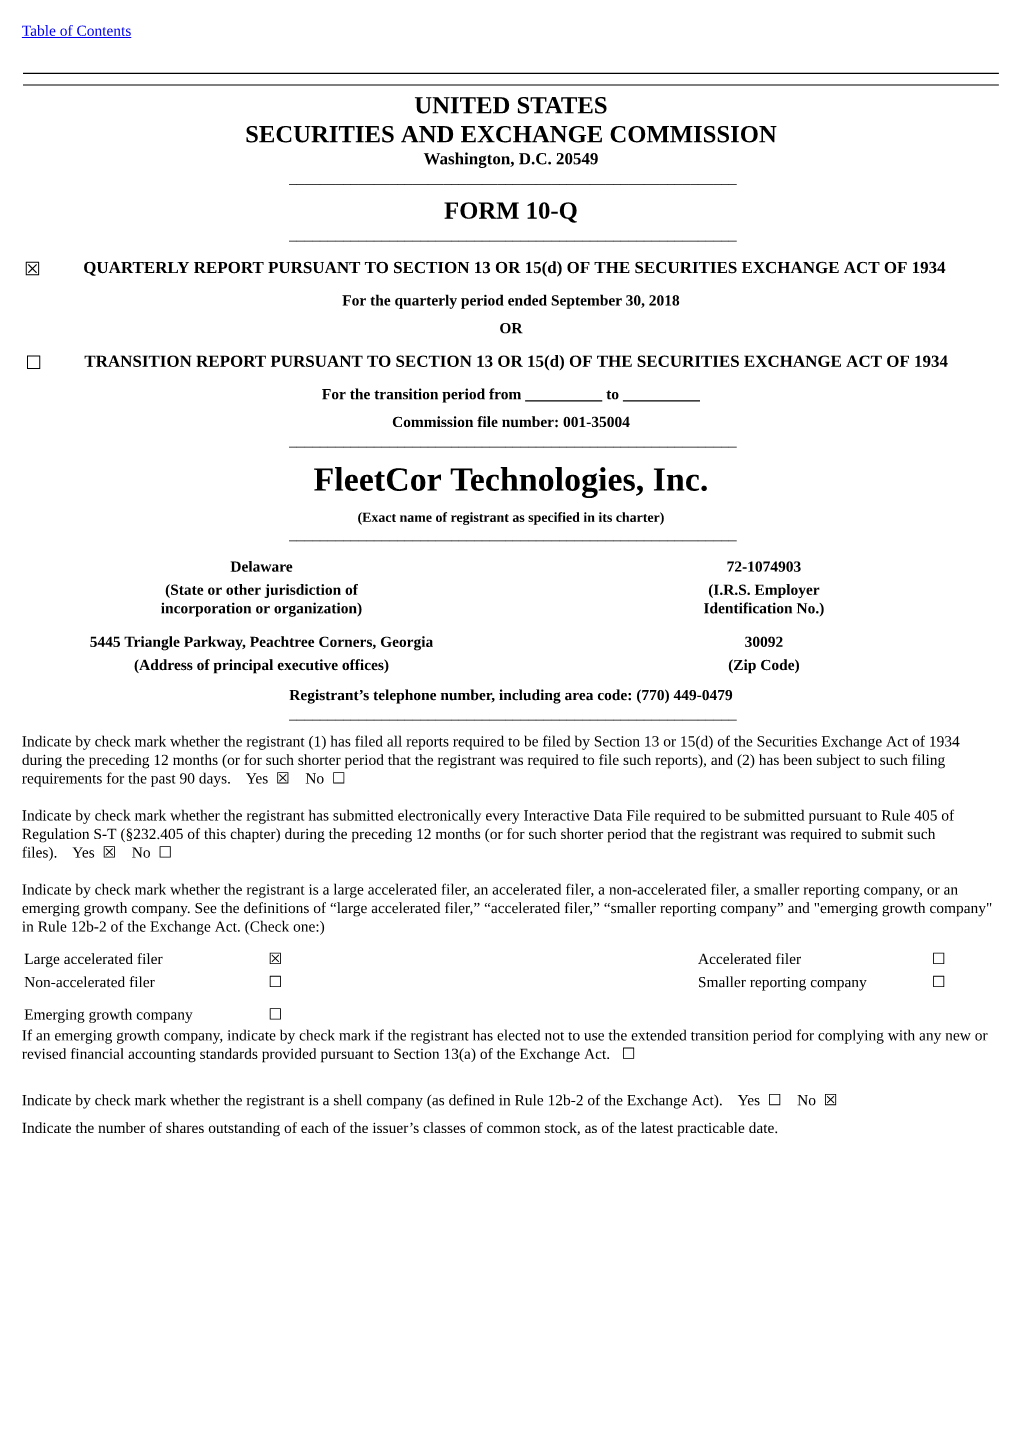 Fleetcor Technologies, Inc. (Exact Name of Registrant As Specified in Its Charter) ______